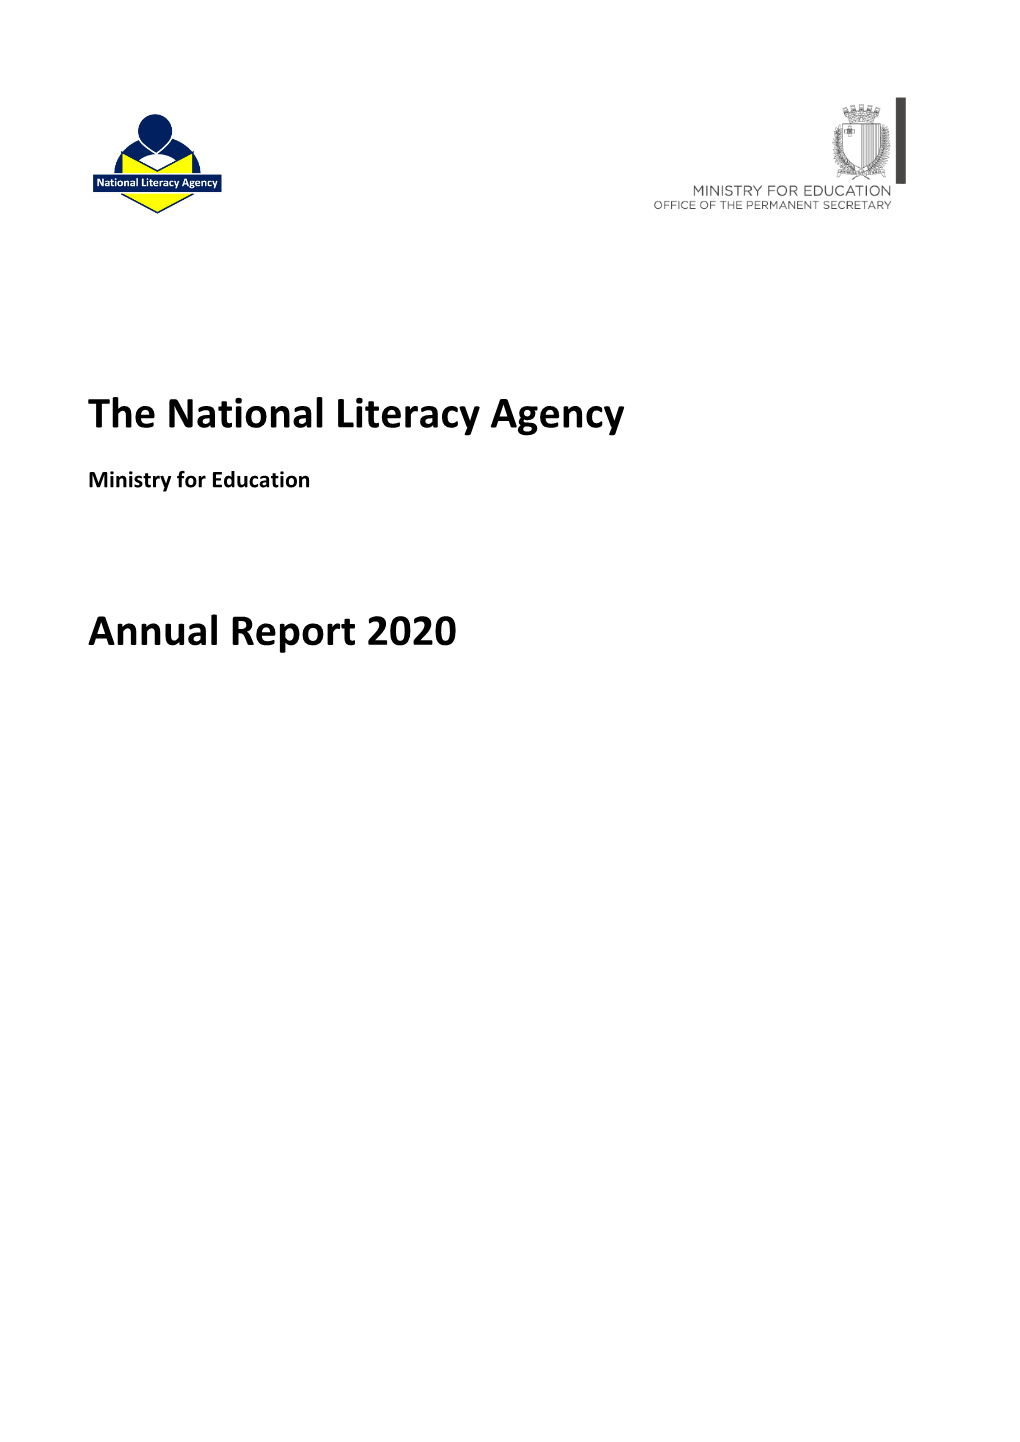 The National Literacy Agency Annual Report 2020